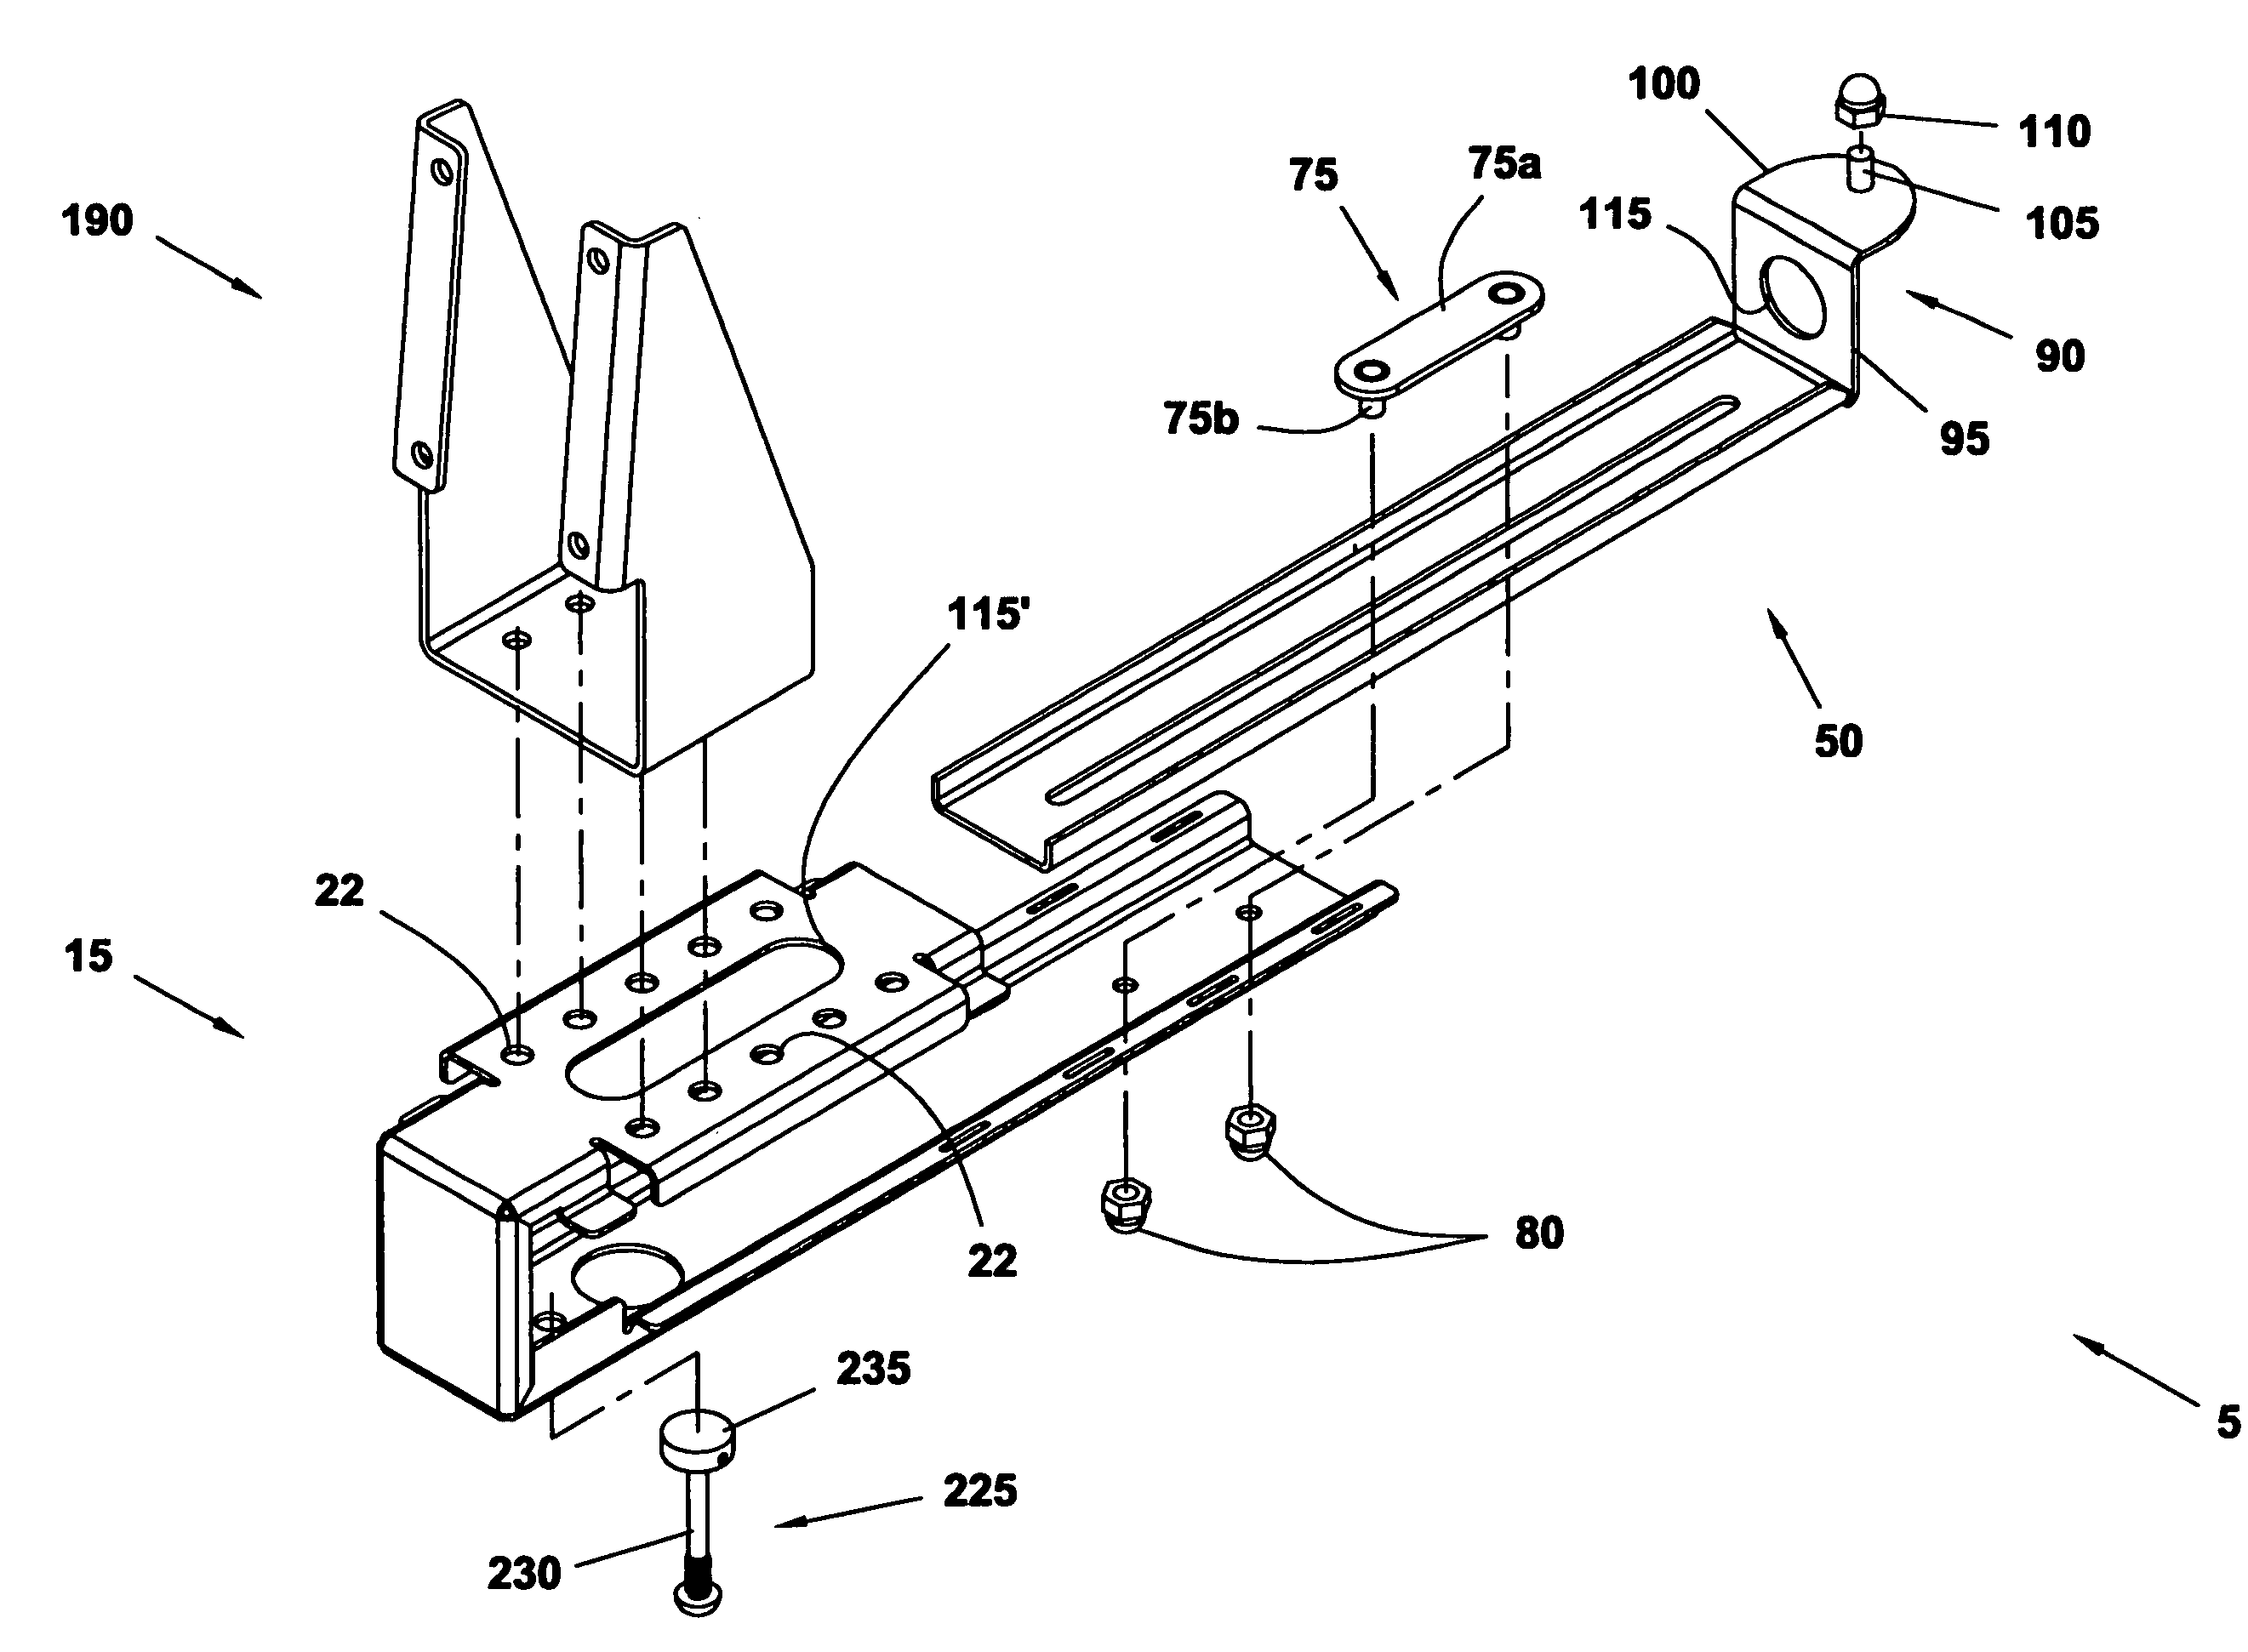 Adjustable bracket assembly for shelf-mounted electronic display device